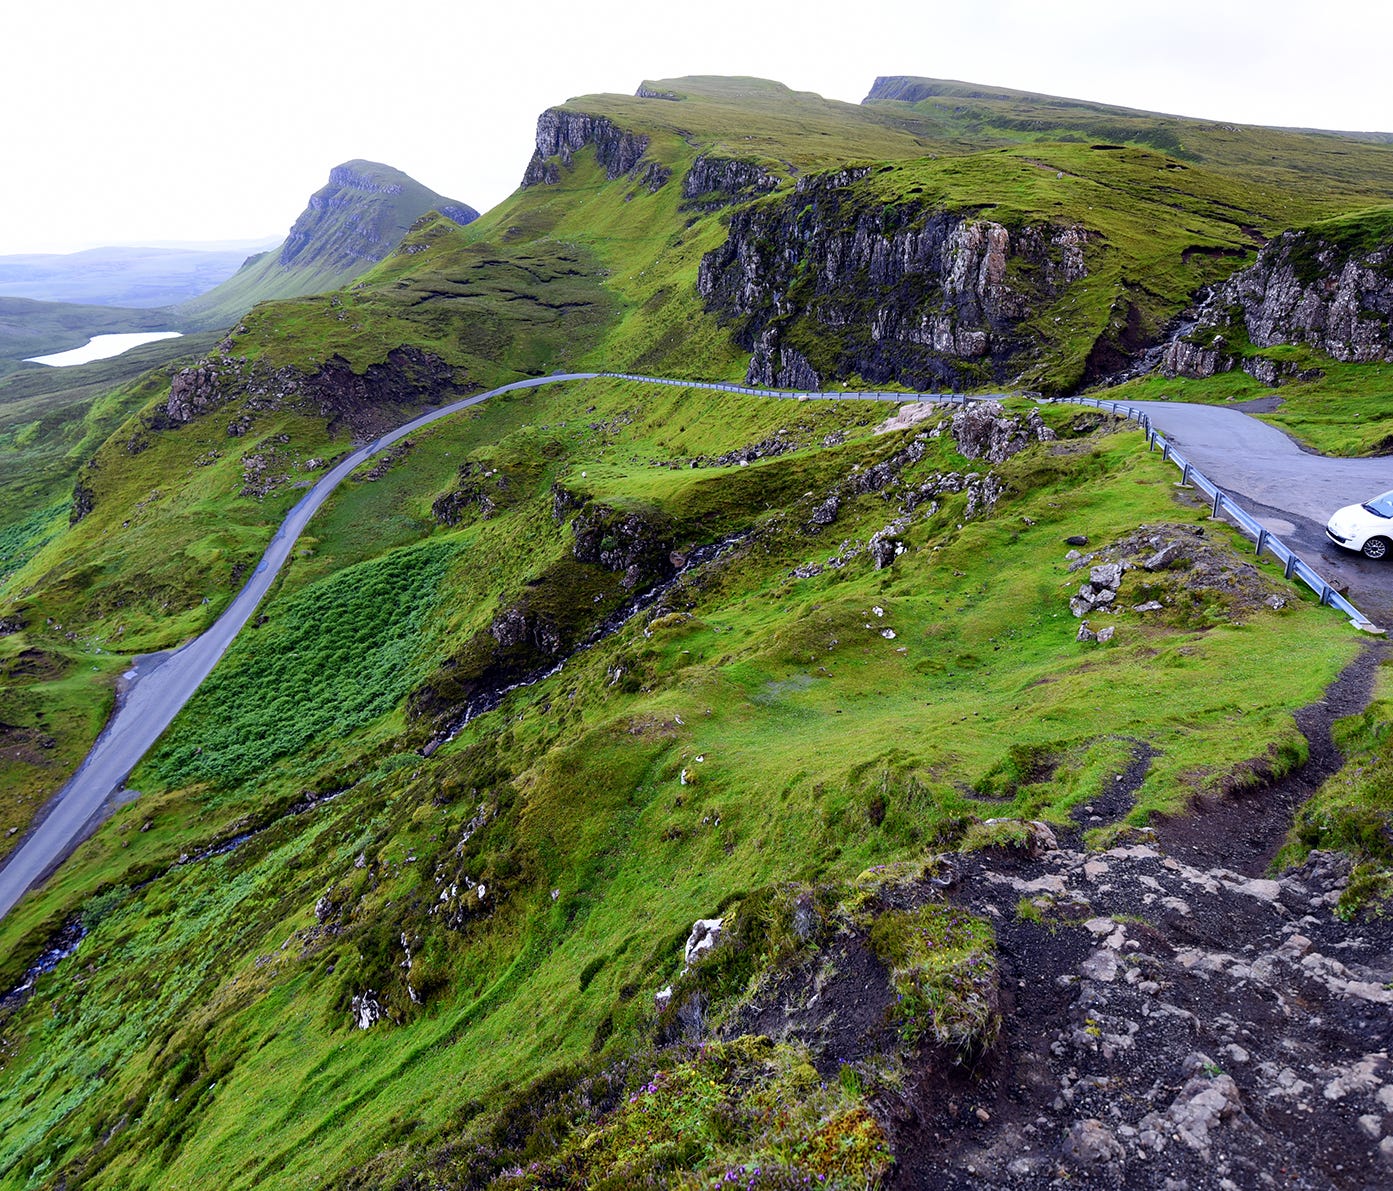 Scotland's sparsely populated Isle of Skye is easiest to explore with a set of wheels that allows you to enjoy the scenery at your own pace.